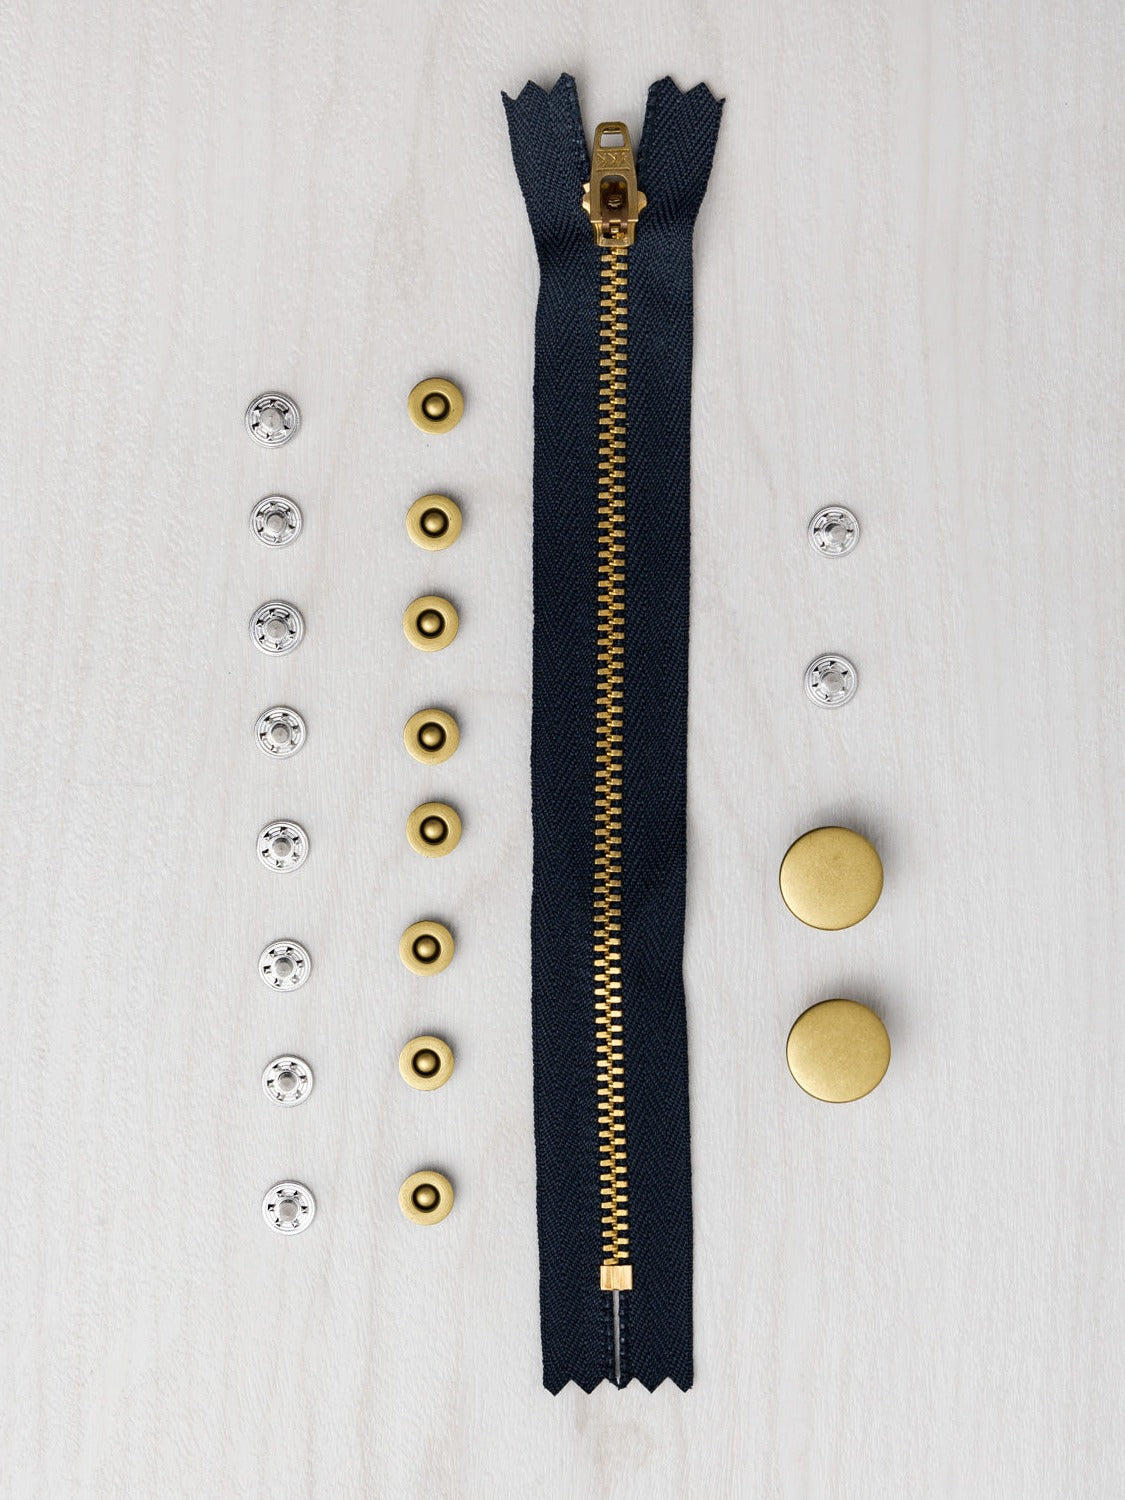 Zipper Fly Kit Components Gold